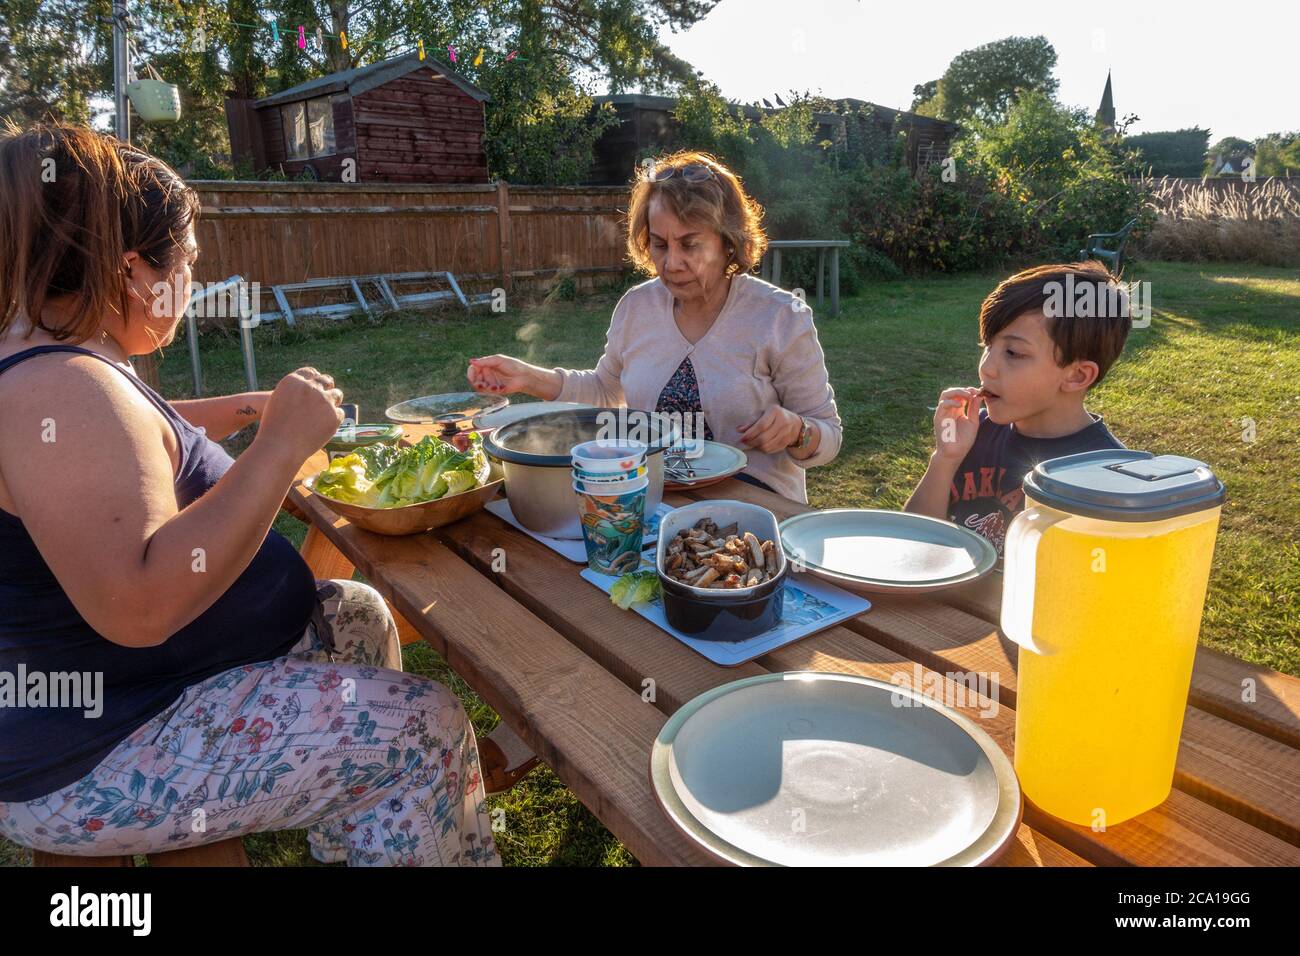 A family eat a meal together on a trestle table outside in the back garden. Stock Photo